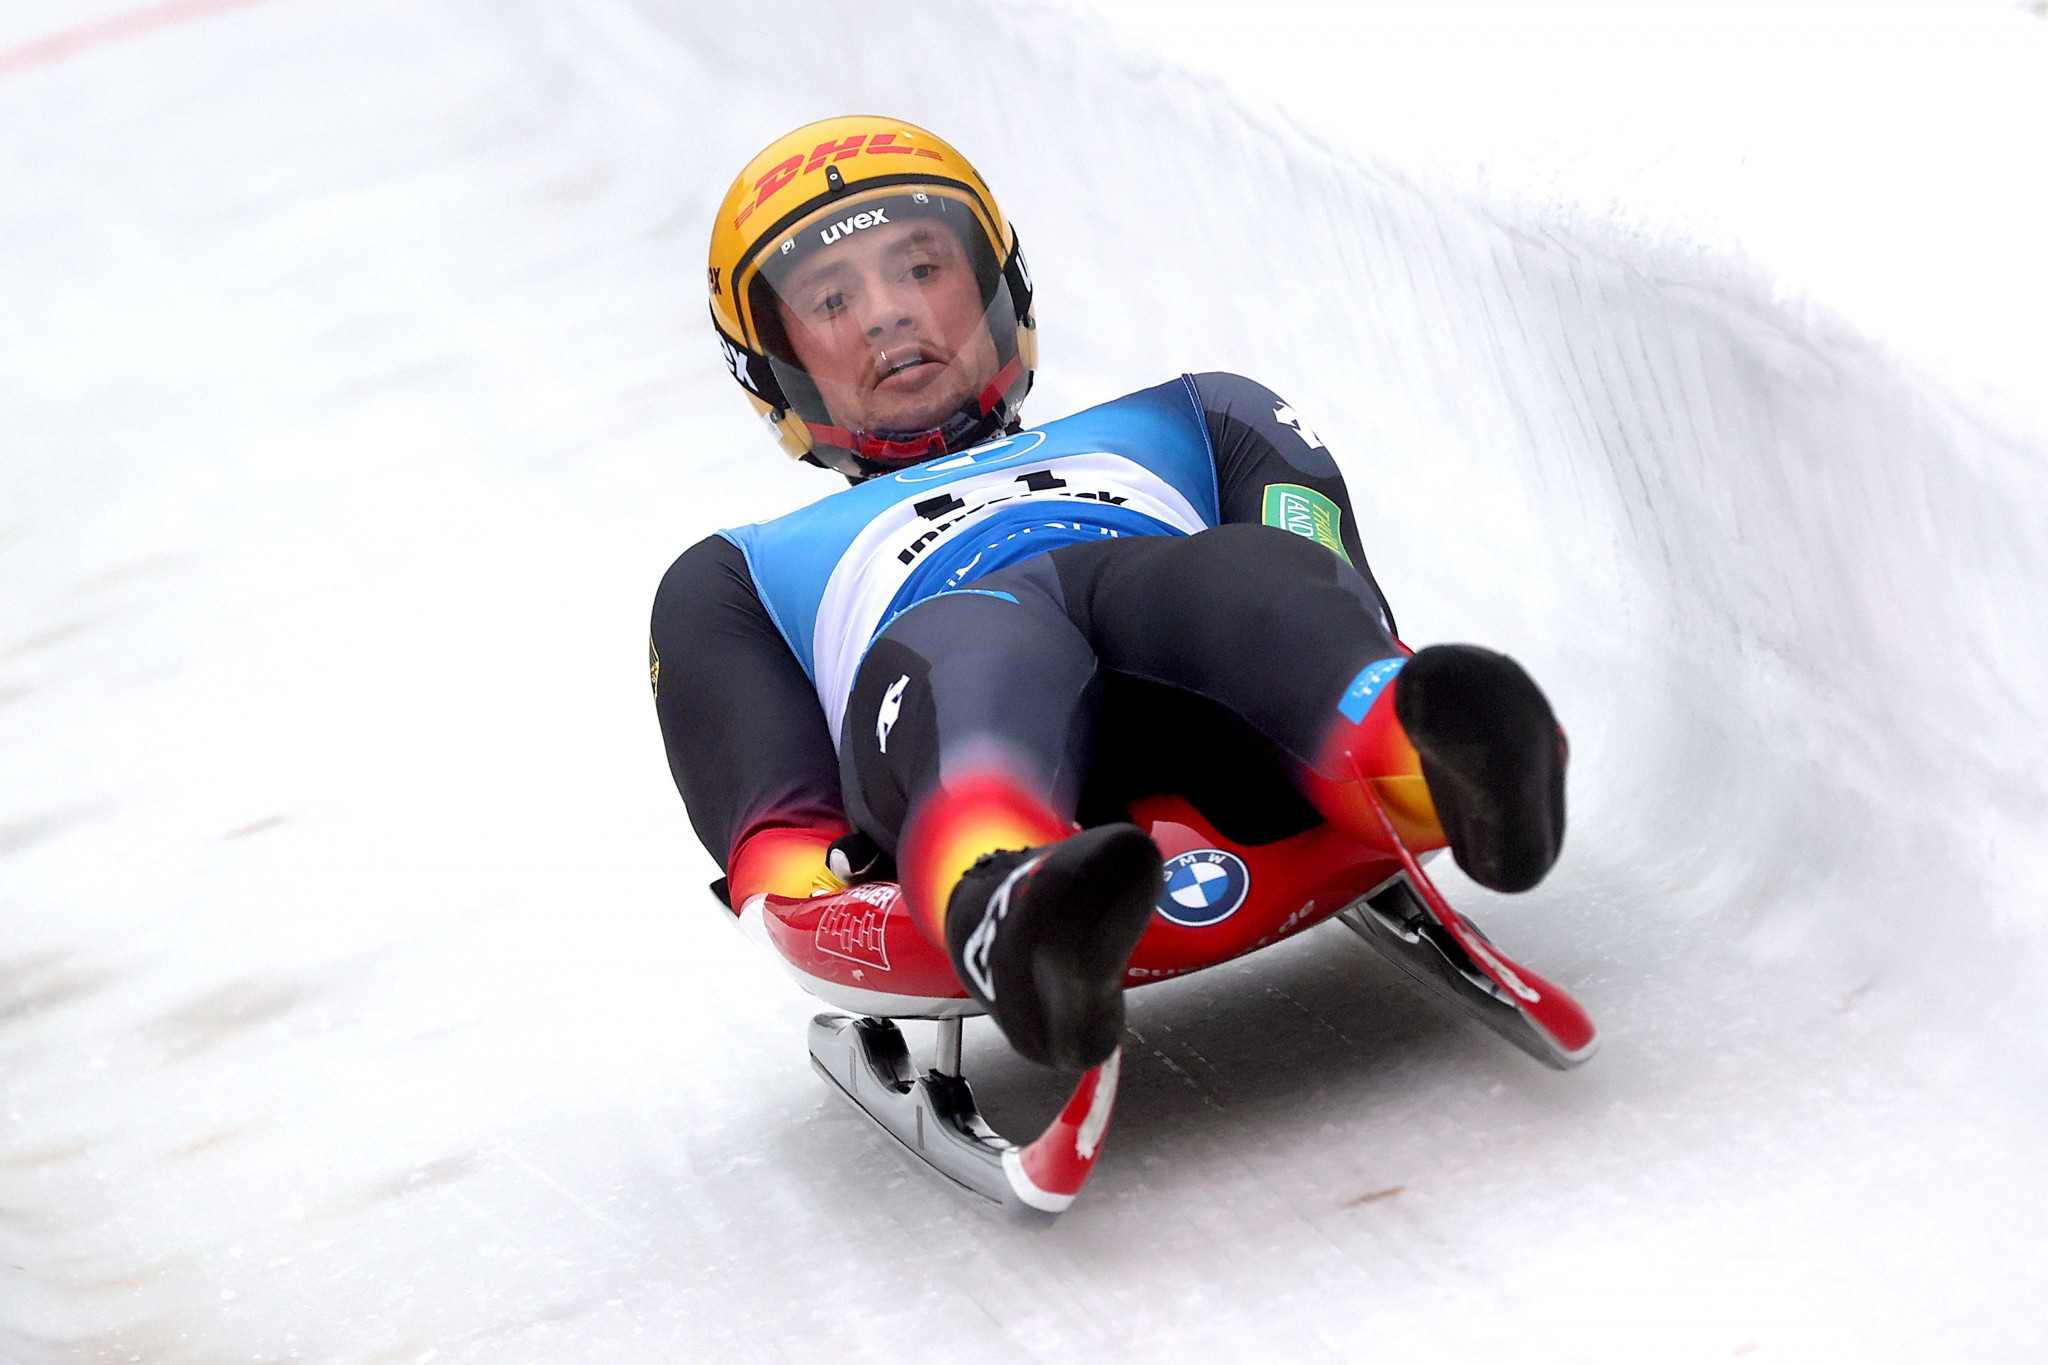 Johannes Ludwig goes into the Oberhof Luge World Cup event atop the overall men's singles standings ©Getty Images